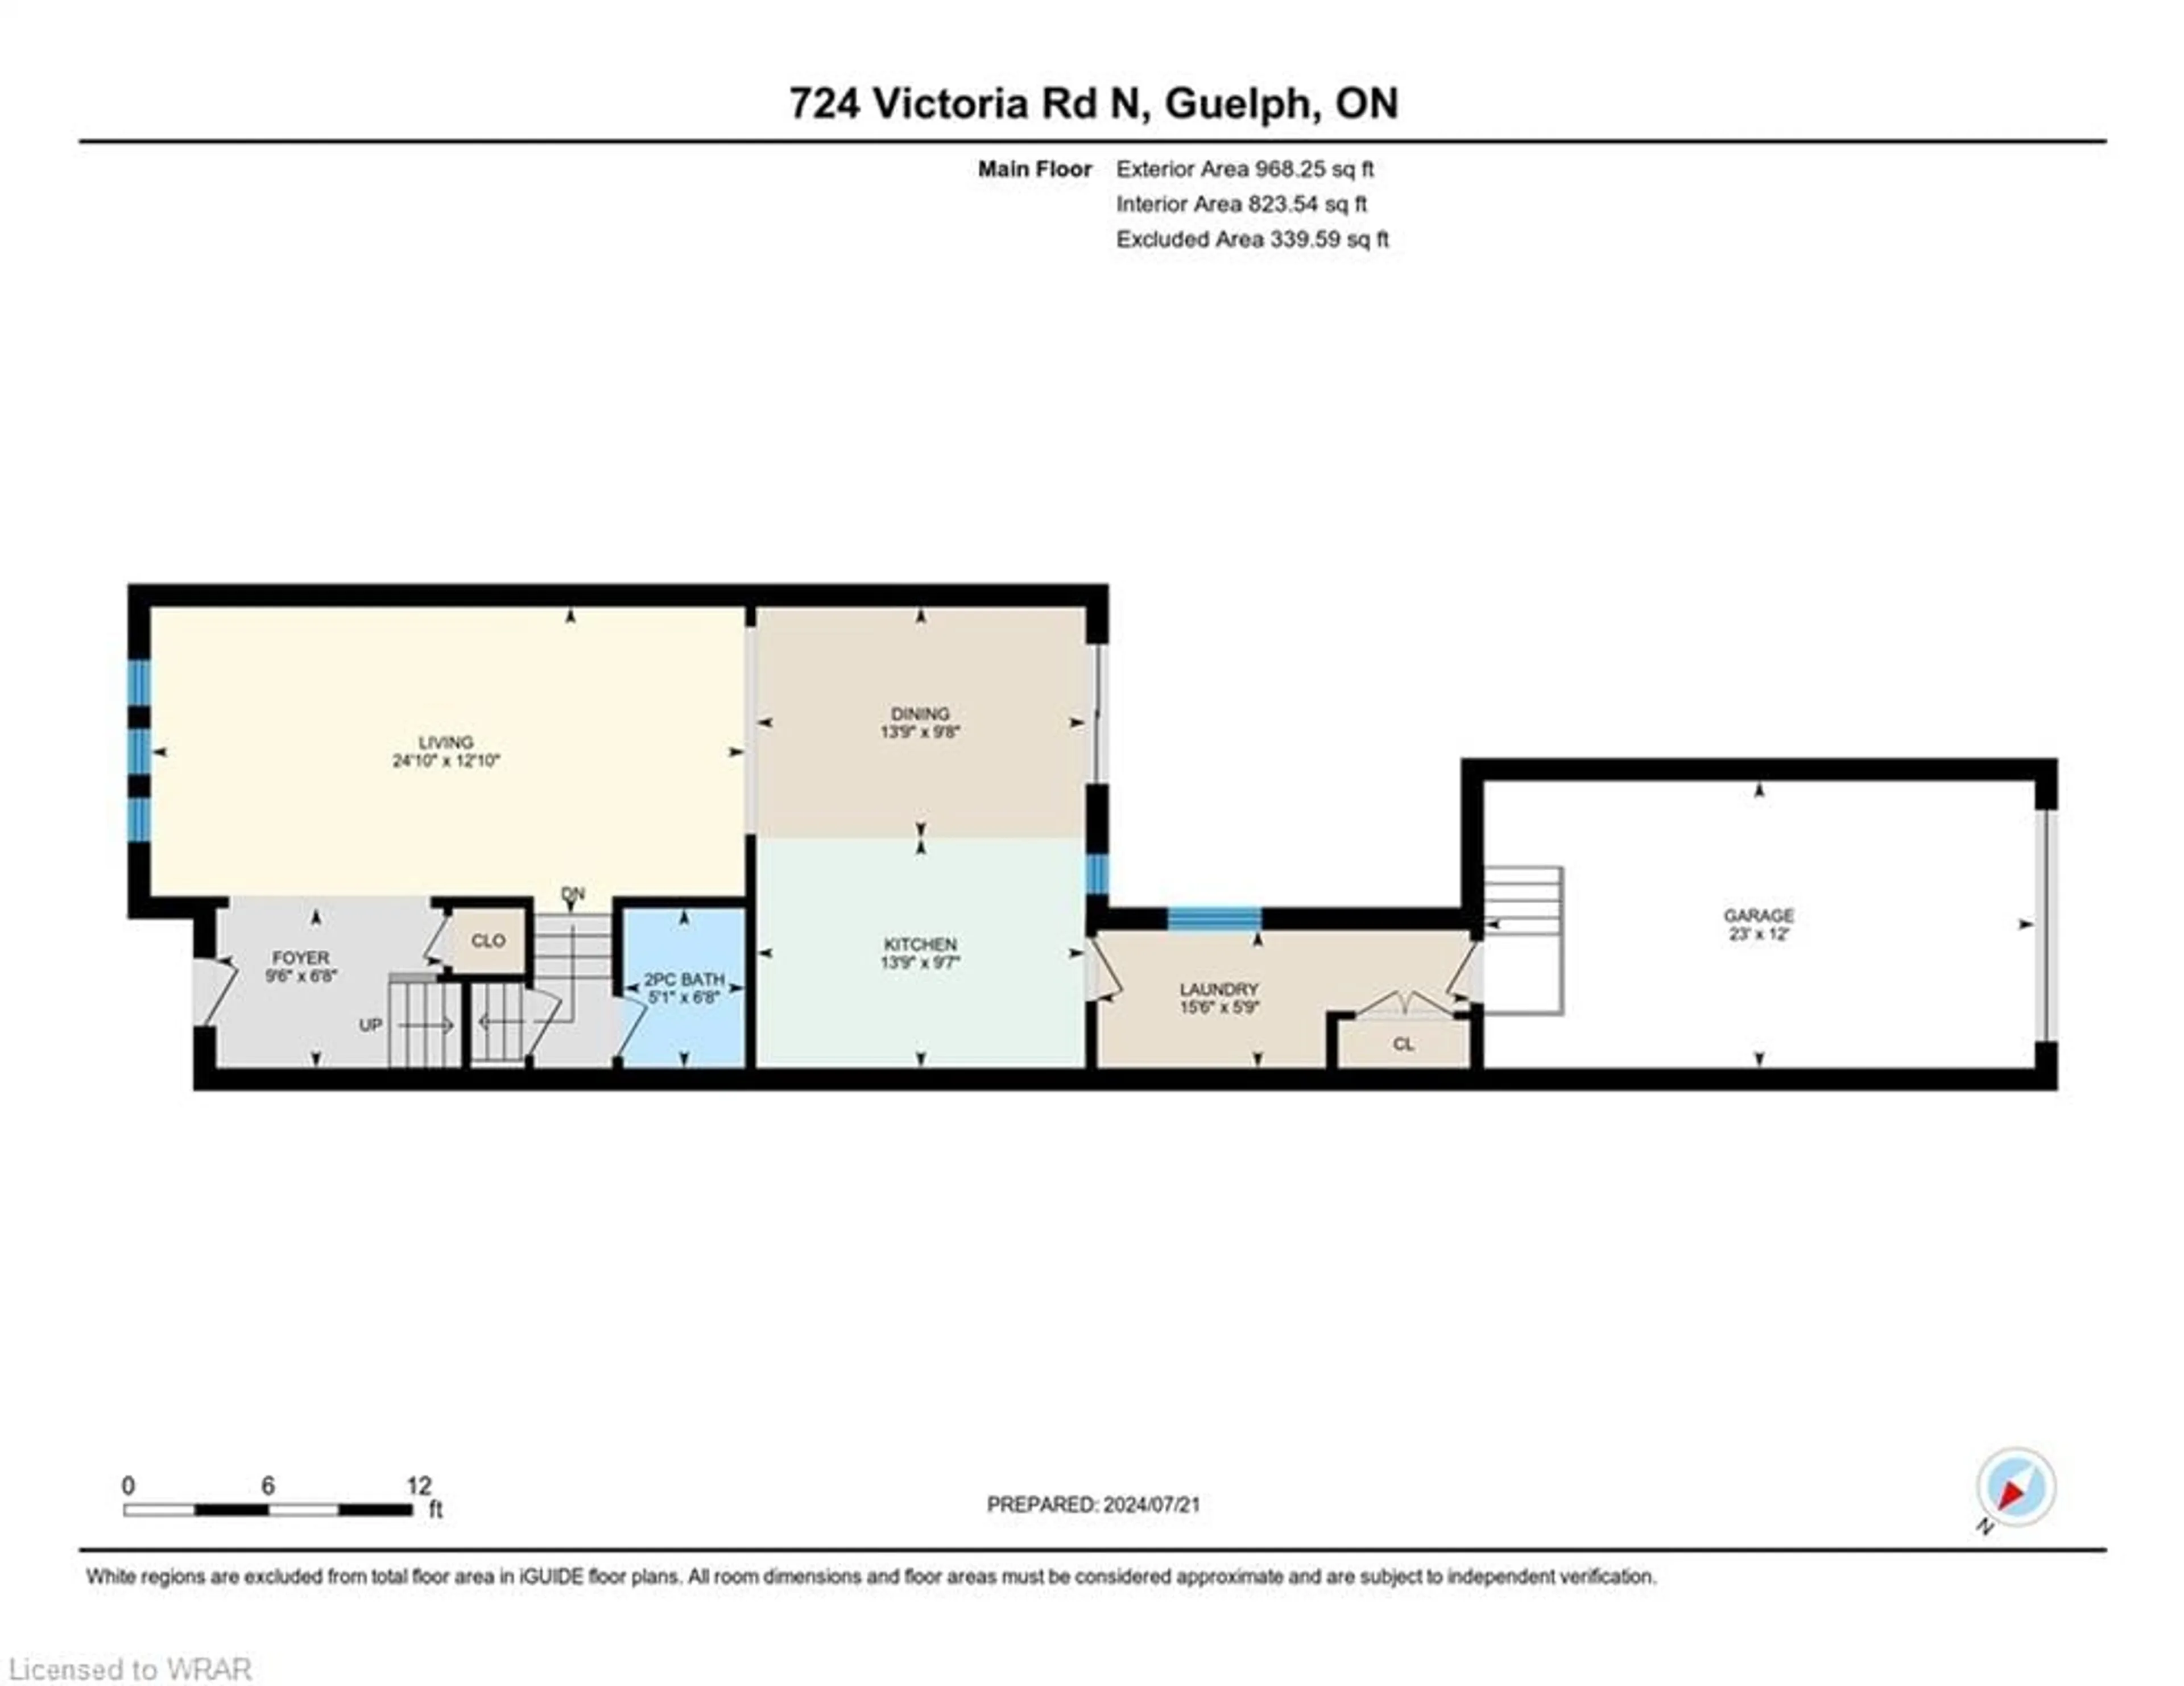 Floor plan for 724 Victoria Rd N Rd, Guelph Ontario N1H 6H9